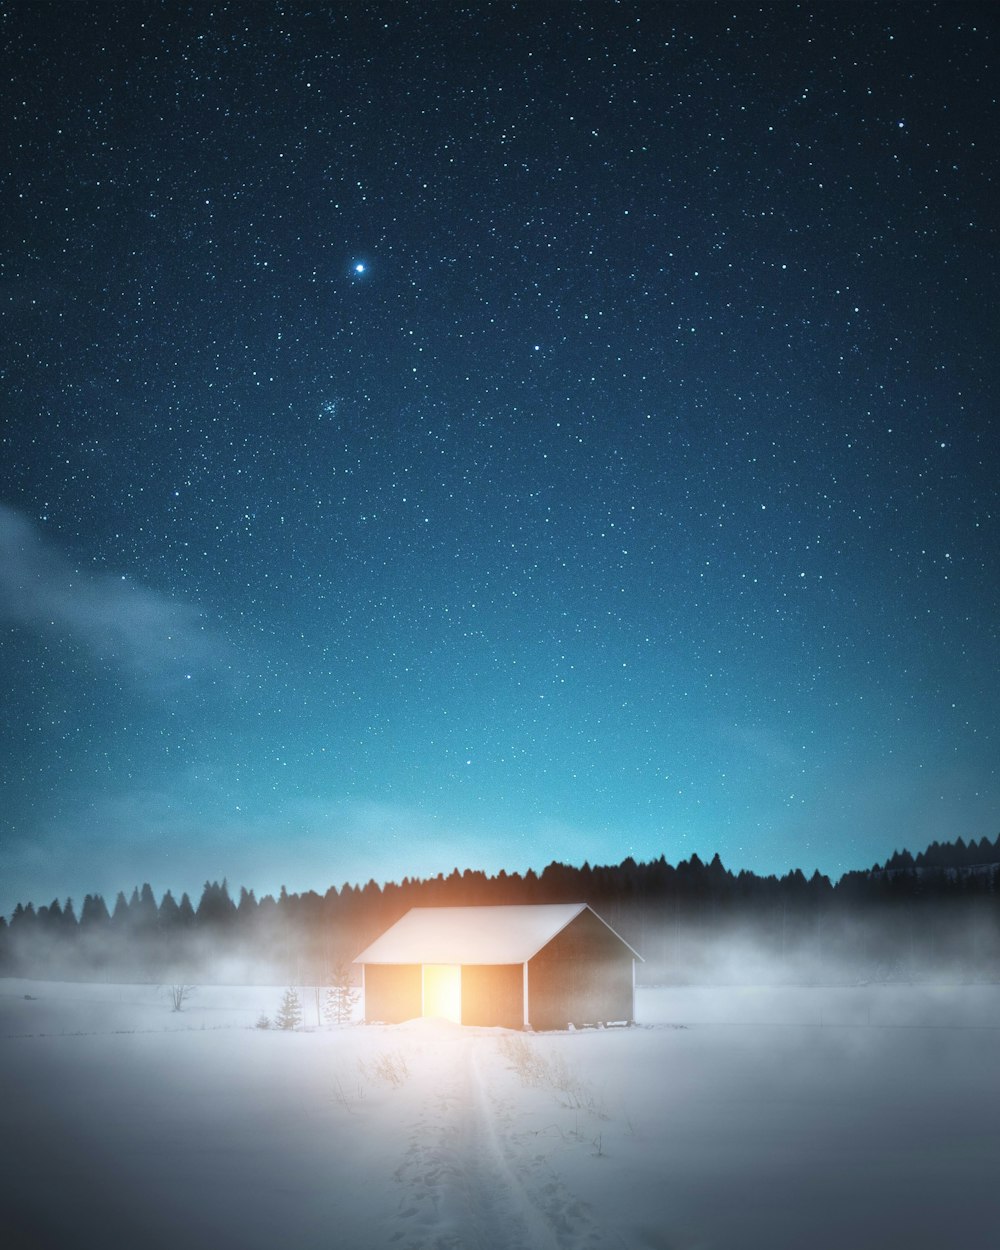 brown wooden house on snow covered ground under starry night